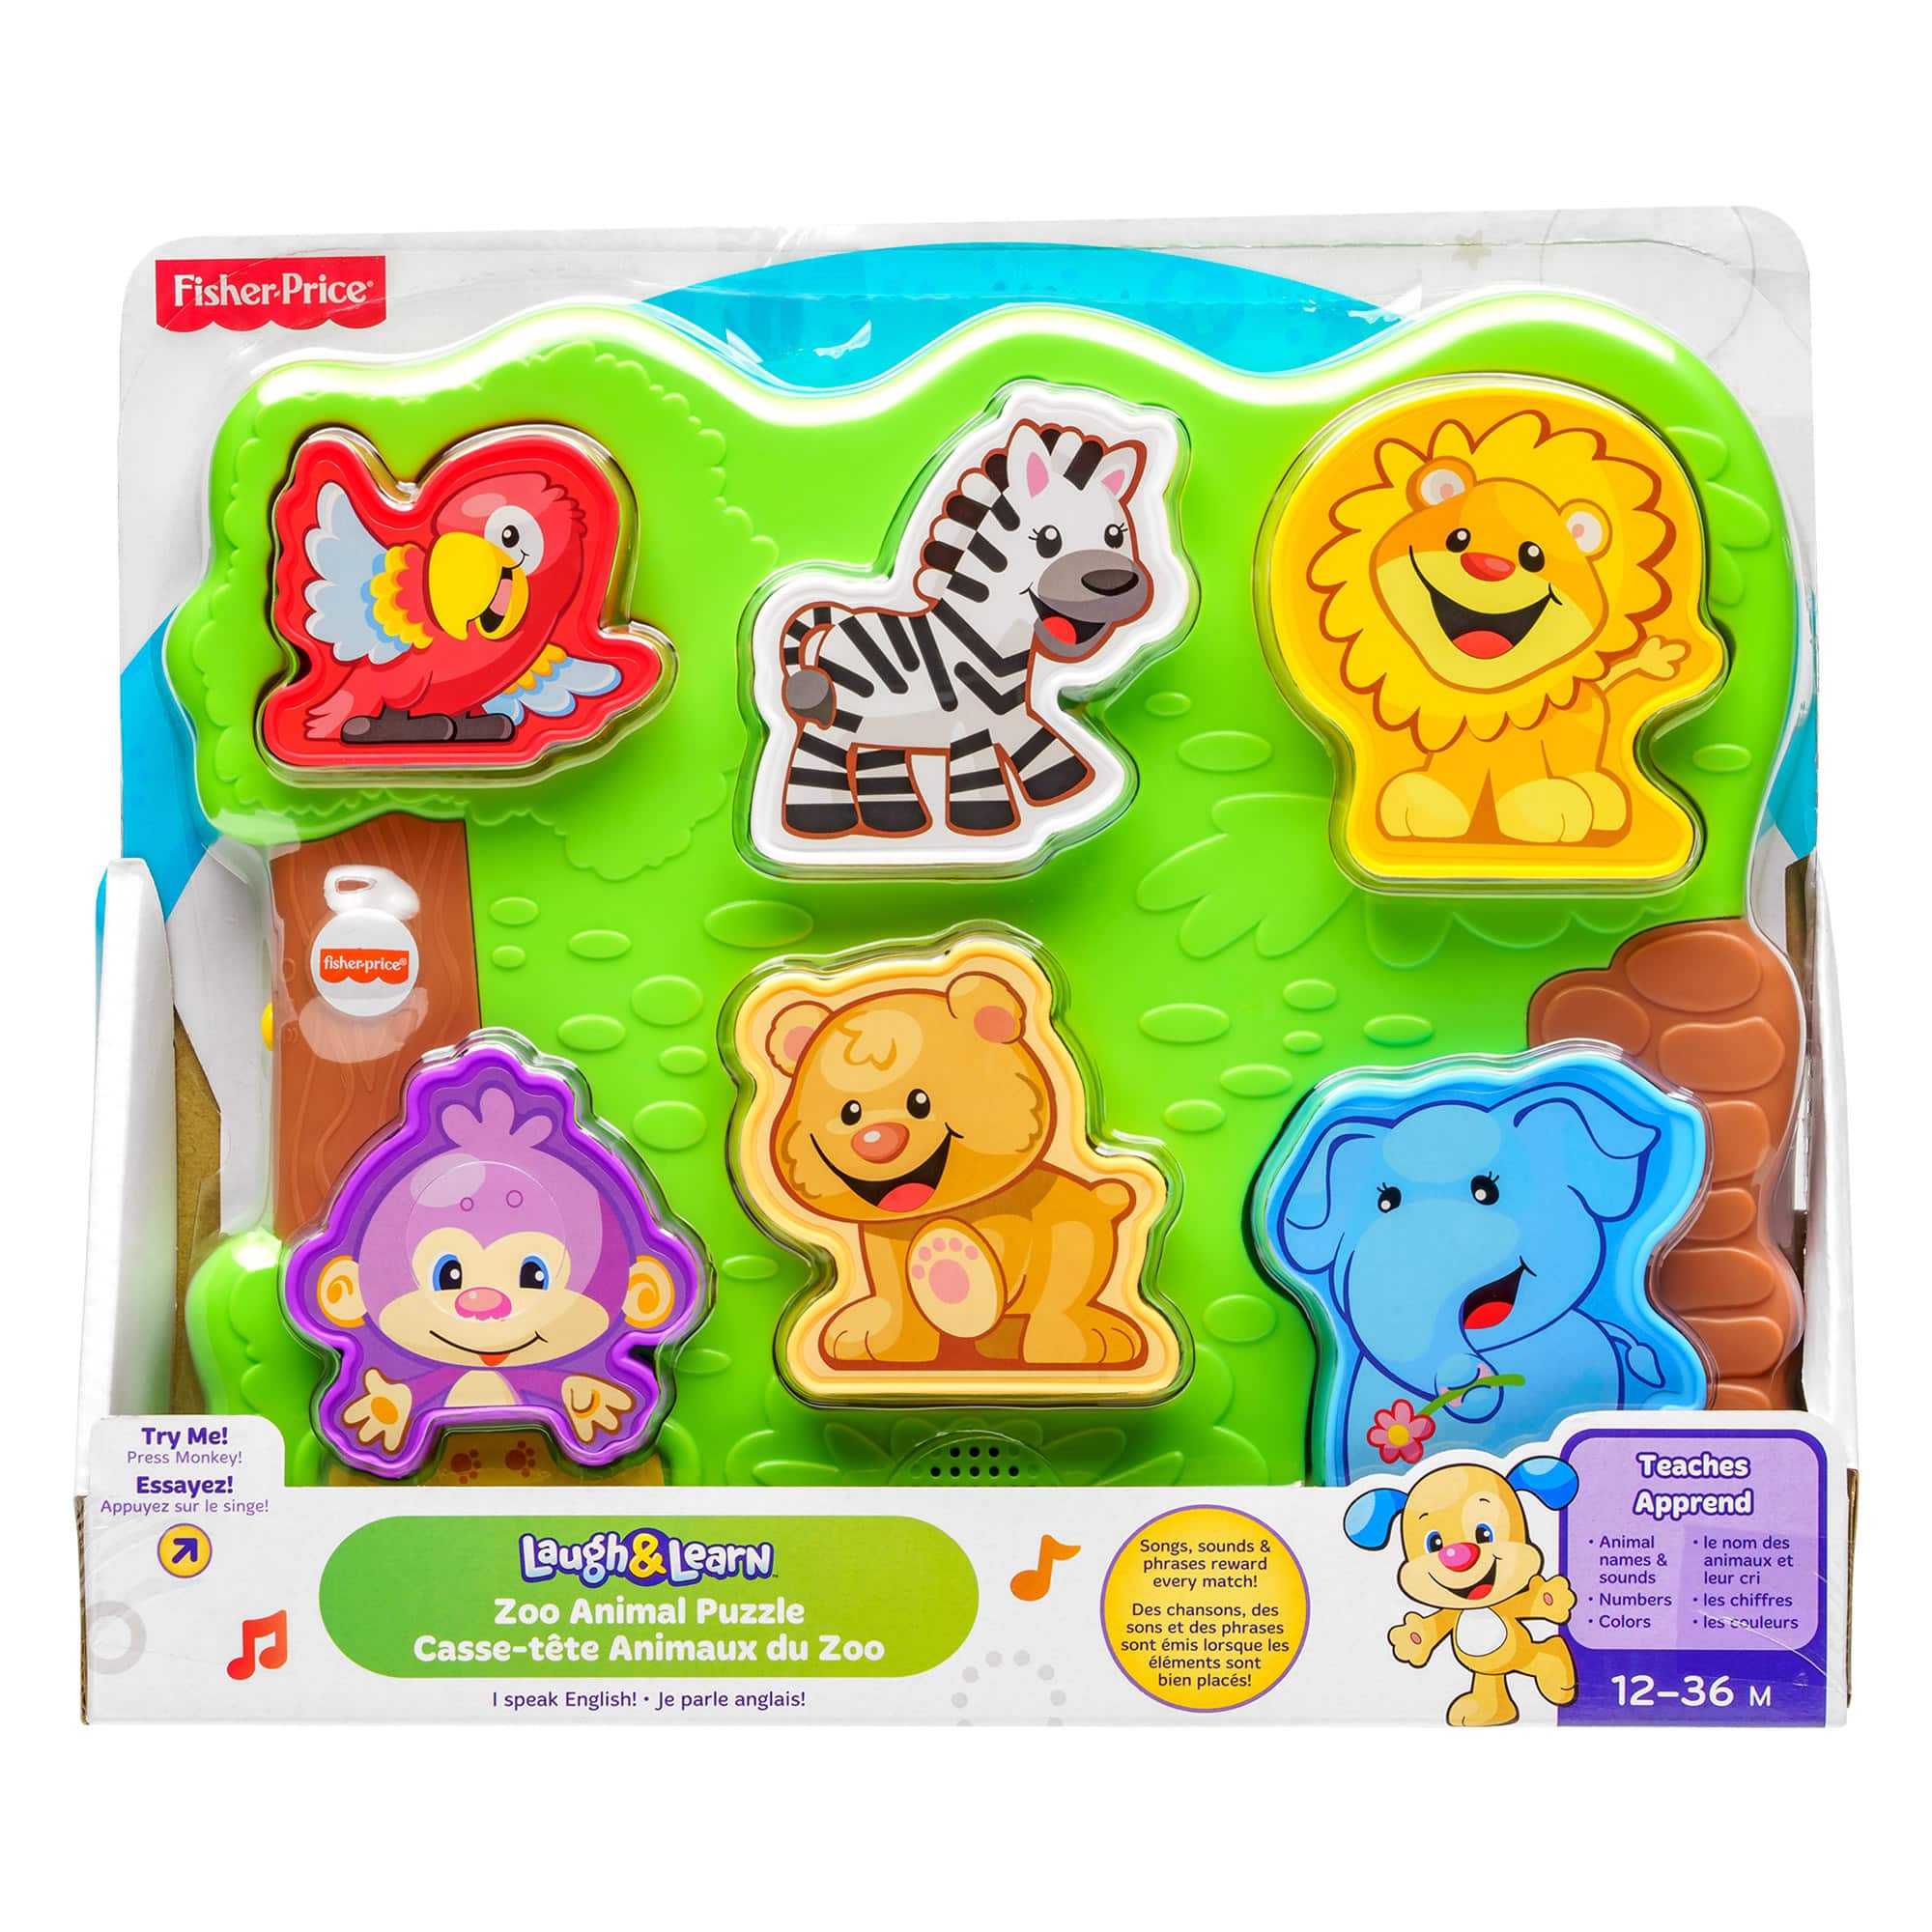 https://www.onlinetoys.com.au/wp-content/uploads/2021/12/fisher-price-laugh-learn-animal-puzzle-assortment-3.jpg